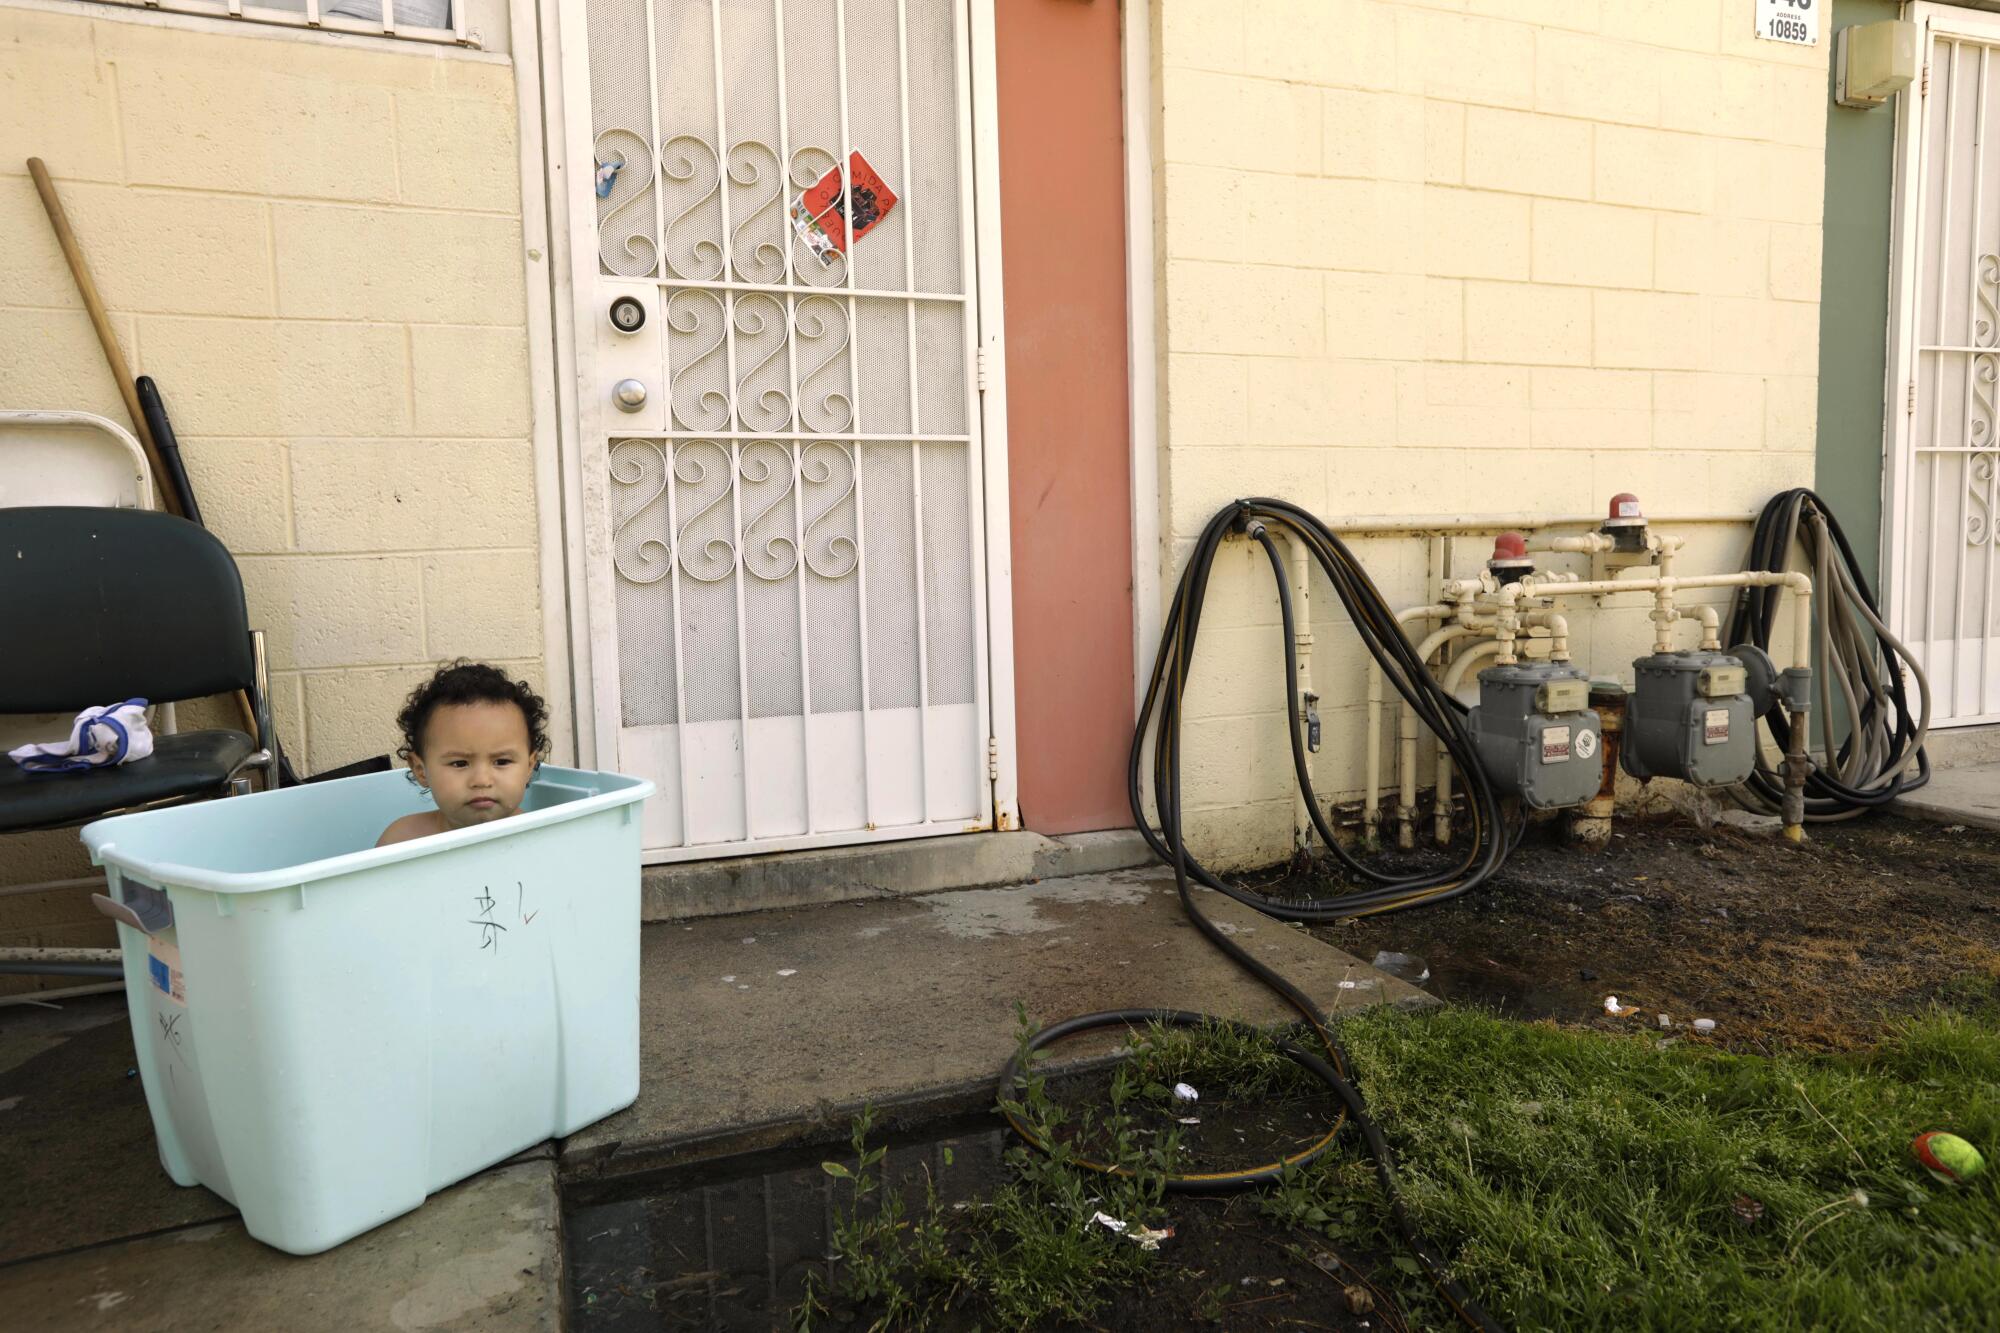 Kylian Lopez, 2, cools off in a laundry basket filled with water under the watchful eye of his mother Jocelyn Lopez.